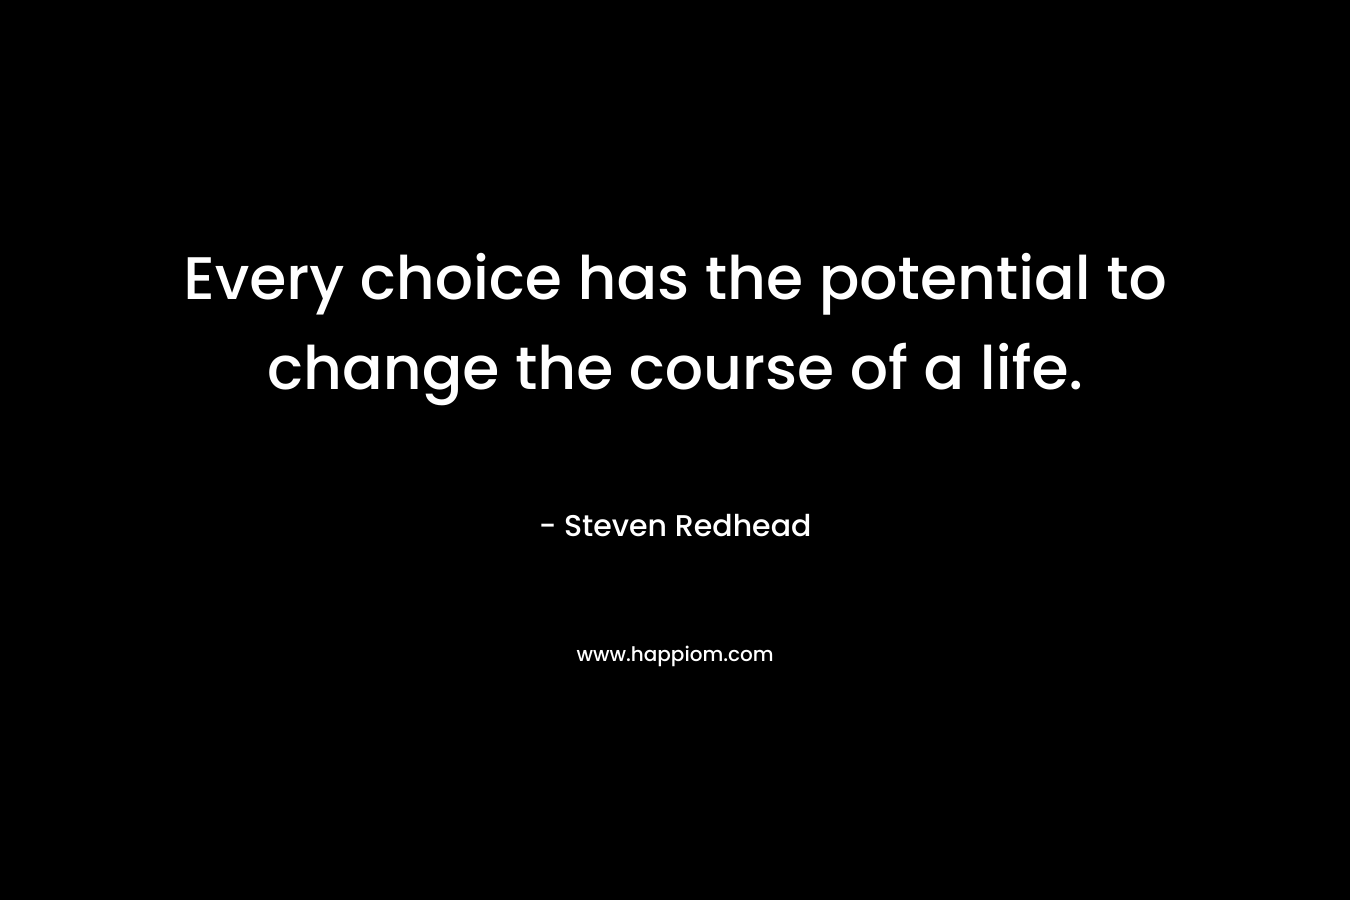 Every choice has the potential to change the course of a life.